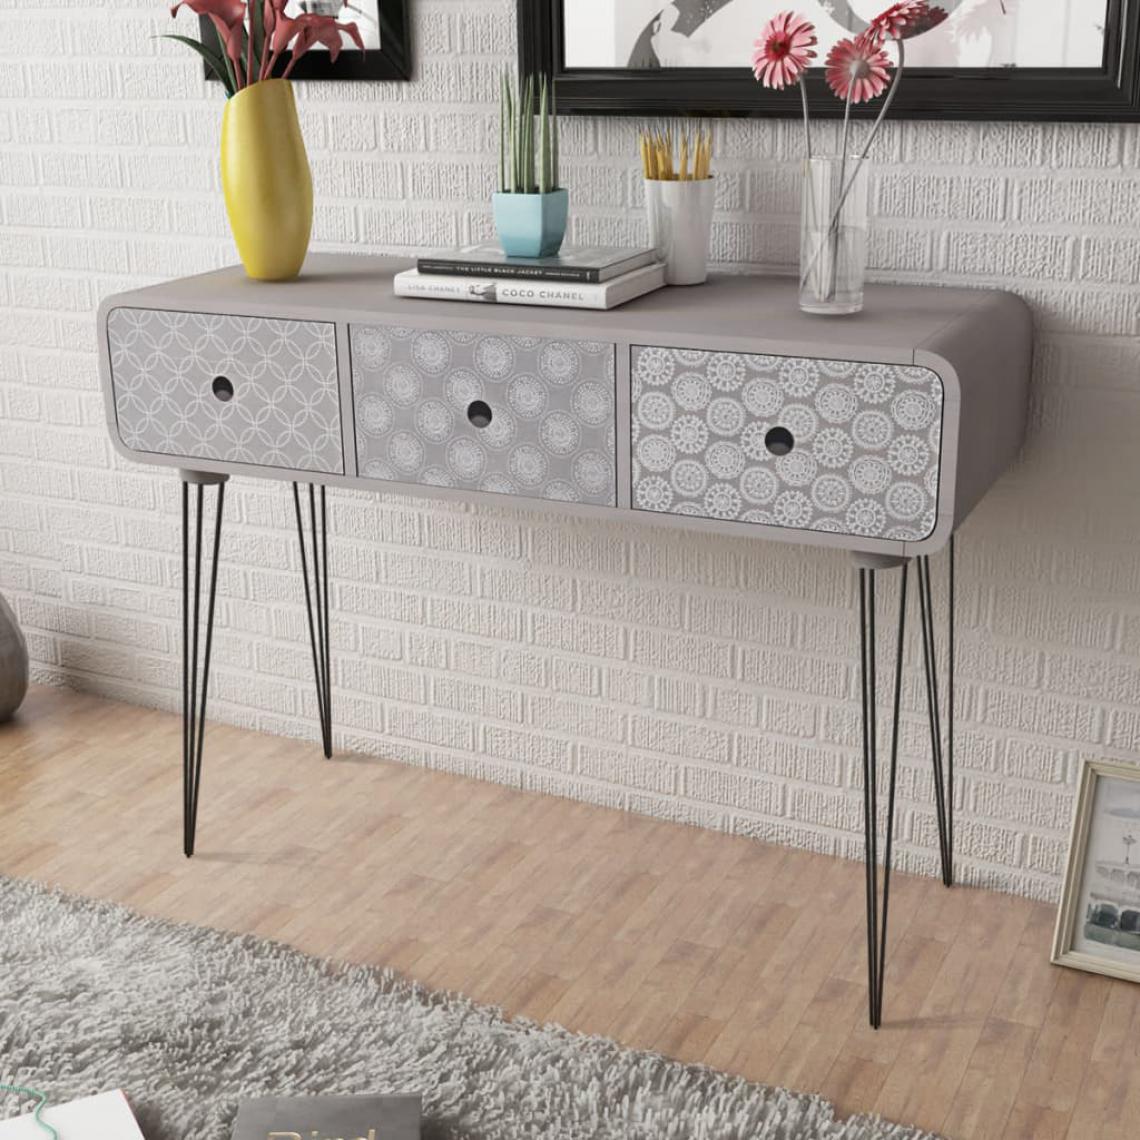 Wottes - Table console - Consoles